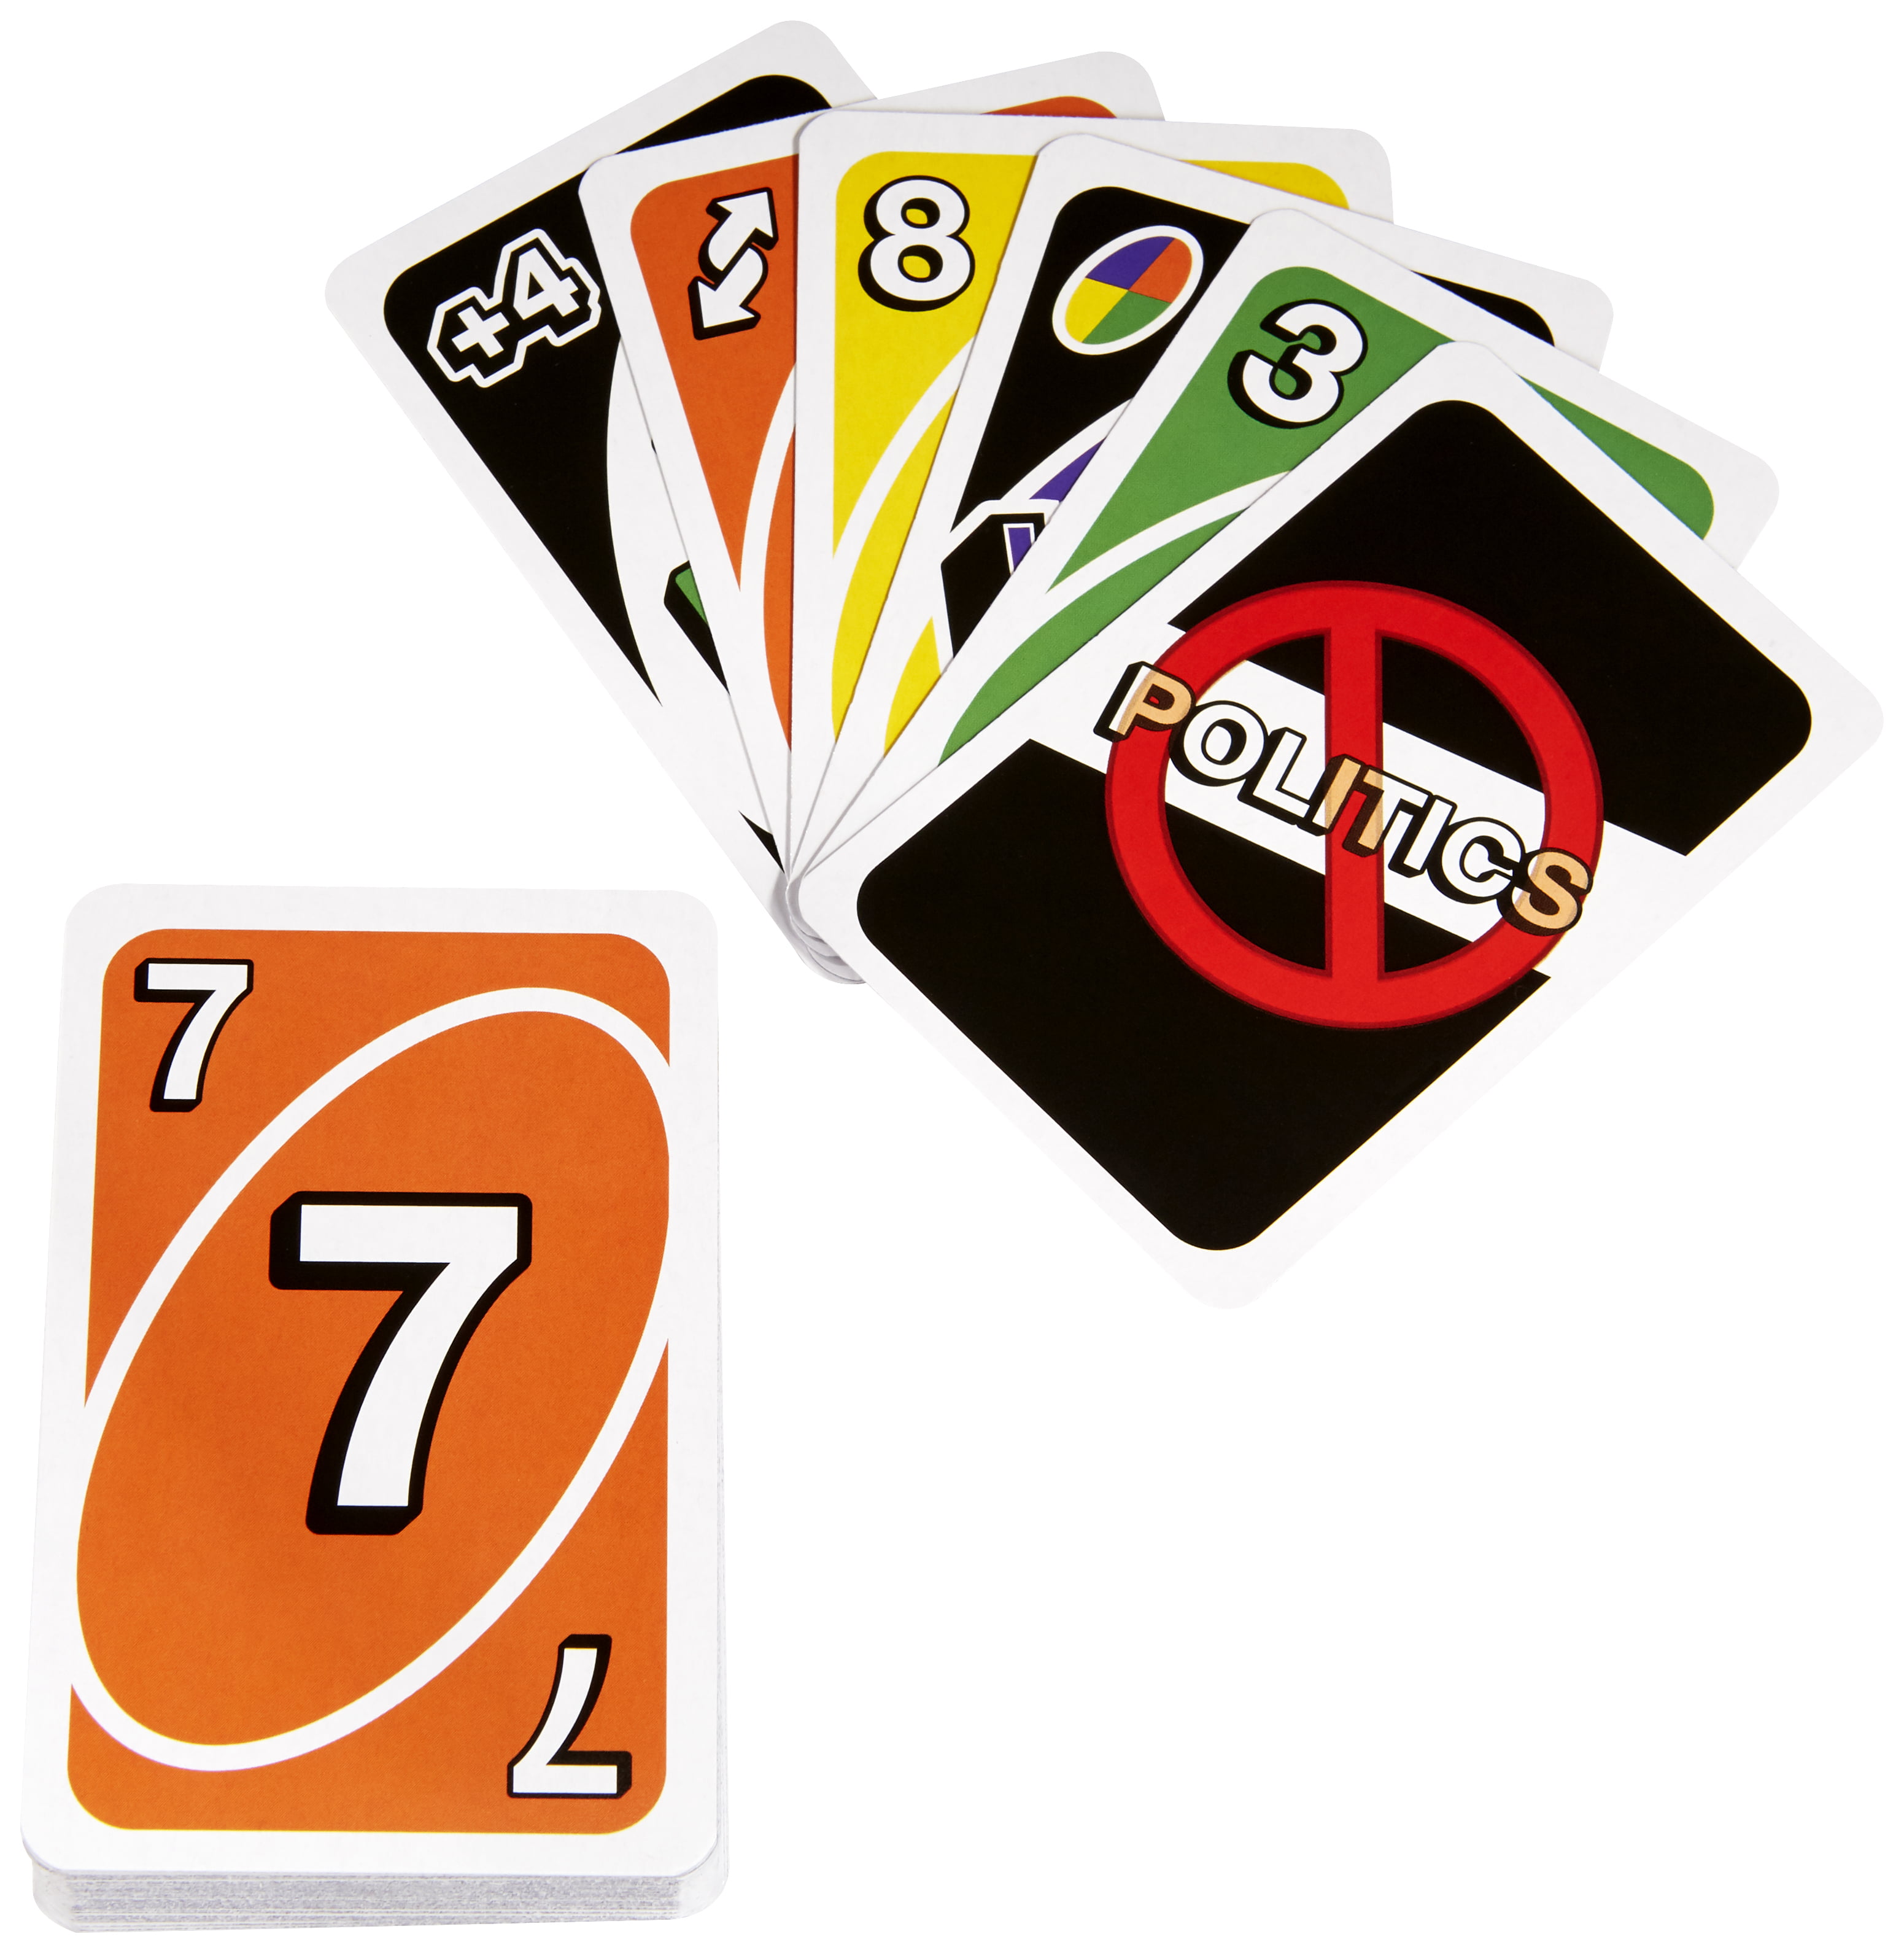 UNO Nonpartisan Card Game for 2-10 Players Ages 7Y+ 